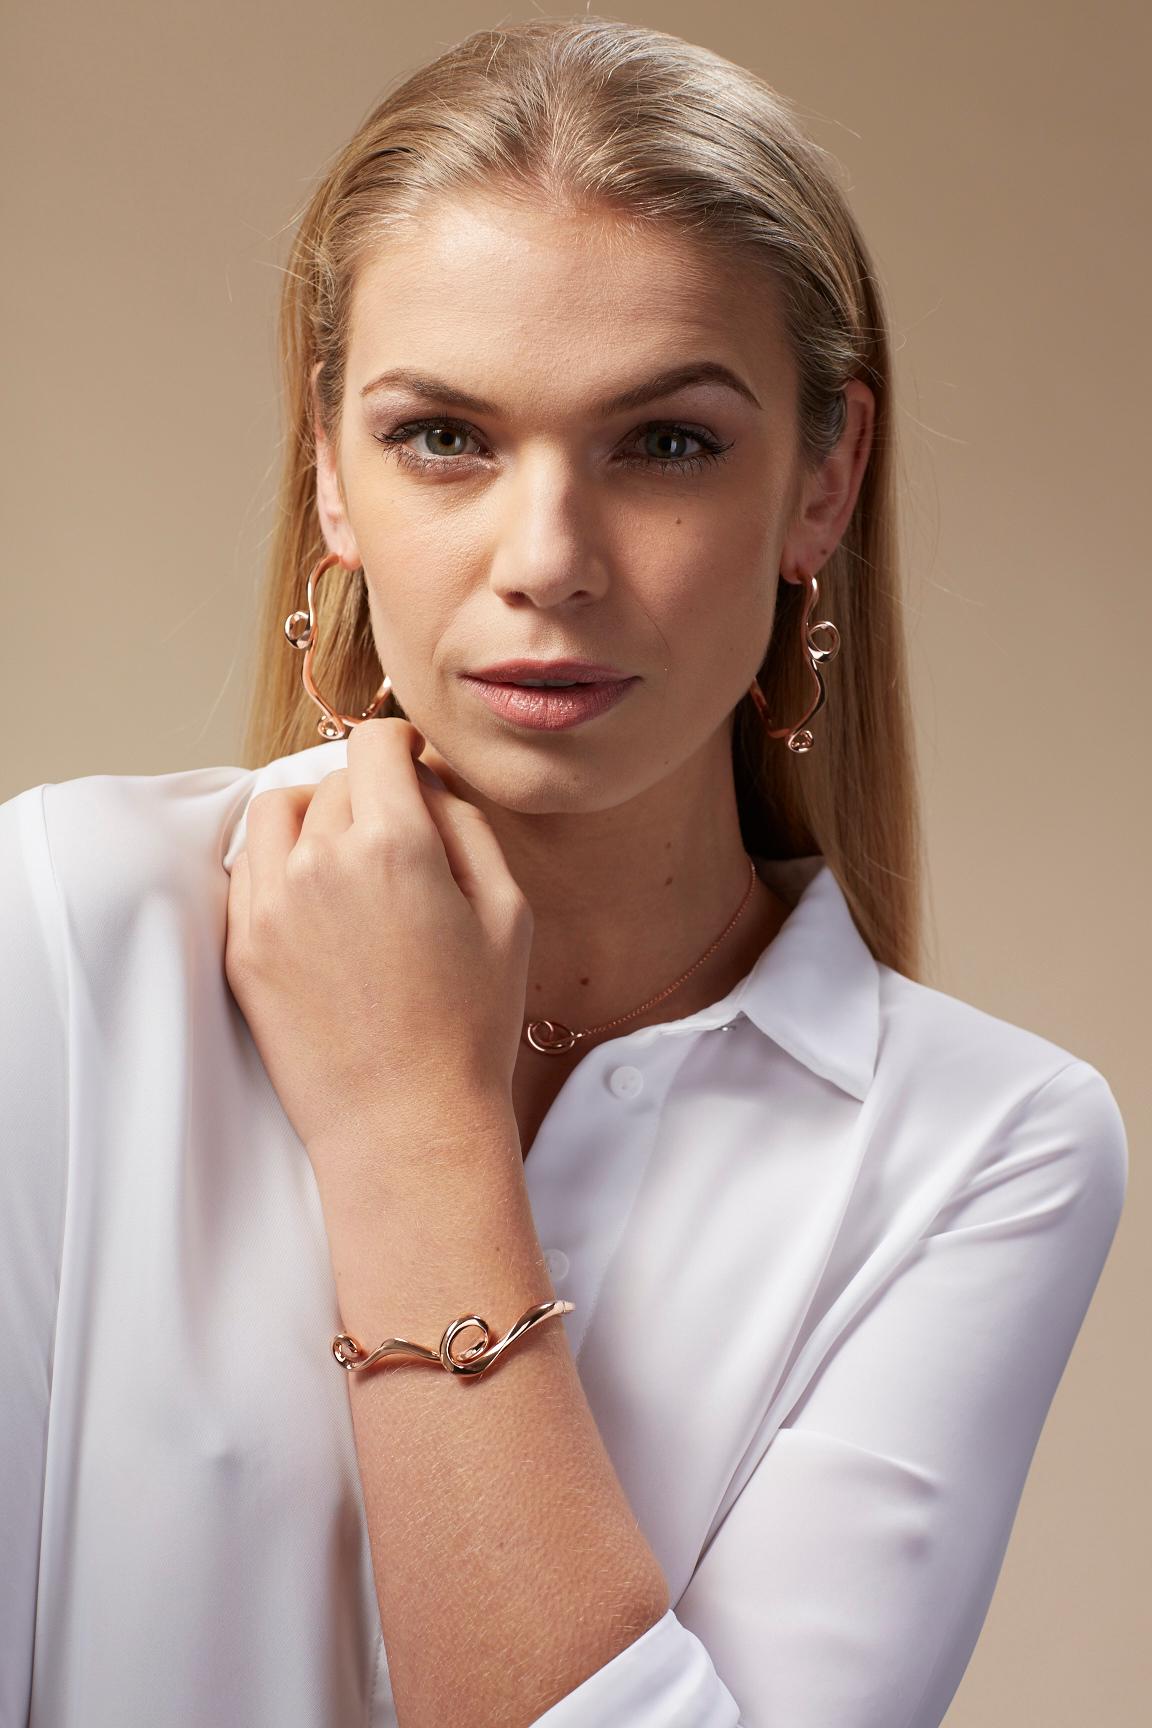 Fei Liu Fine Jewellery's Serenity collection a symbol of everlasting love of the infinity knot is embodied within the feminine curves. The Serenity large bangle perfectly encapsulated the wispy forms in 8 hearts and 8 arrows cubic zirconia pavé set